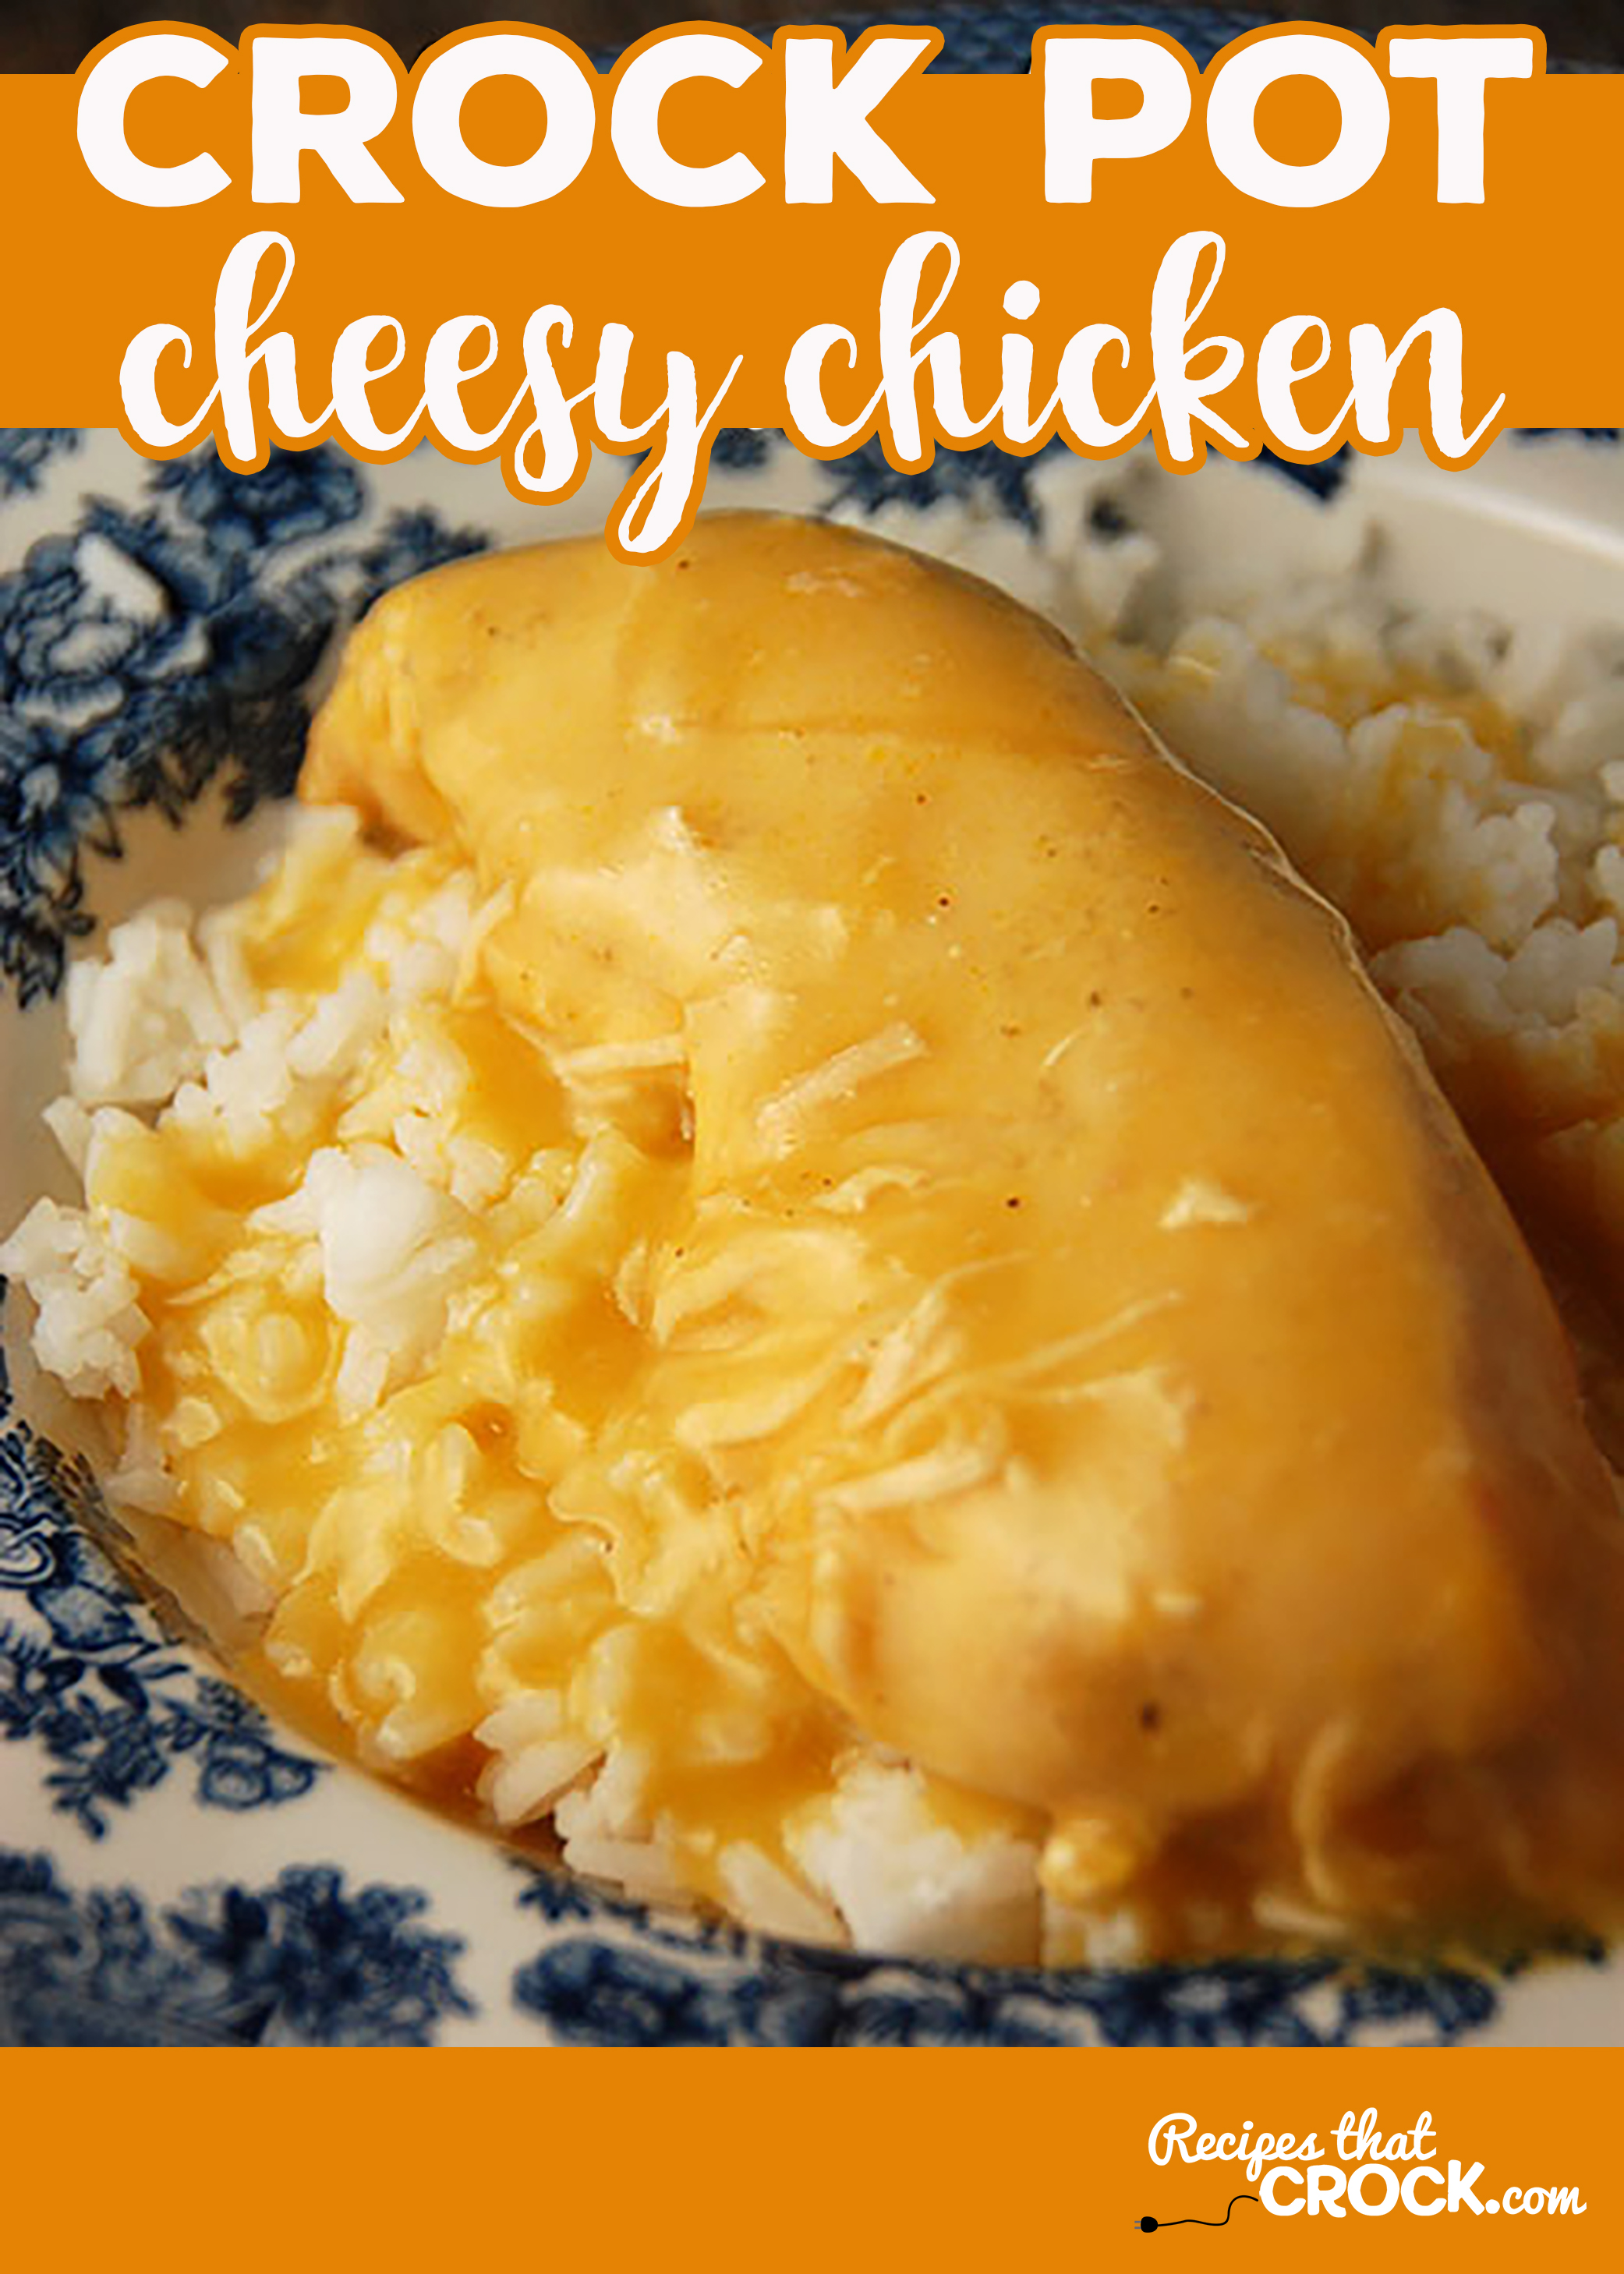 Do you love a dump and go recipe as much as I do? This Cheesy Crock Pot Chicken is so simple to throw together and has a flavor that adults and kids alike love! via @recipescrock